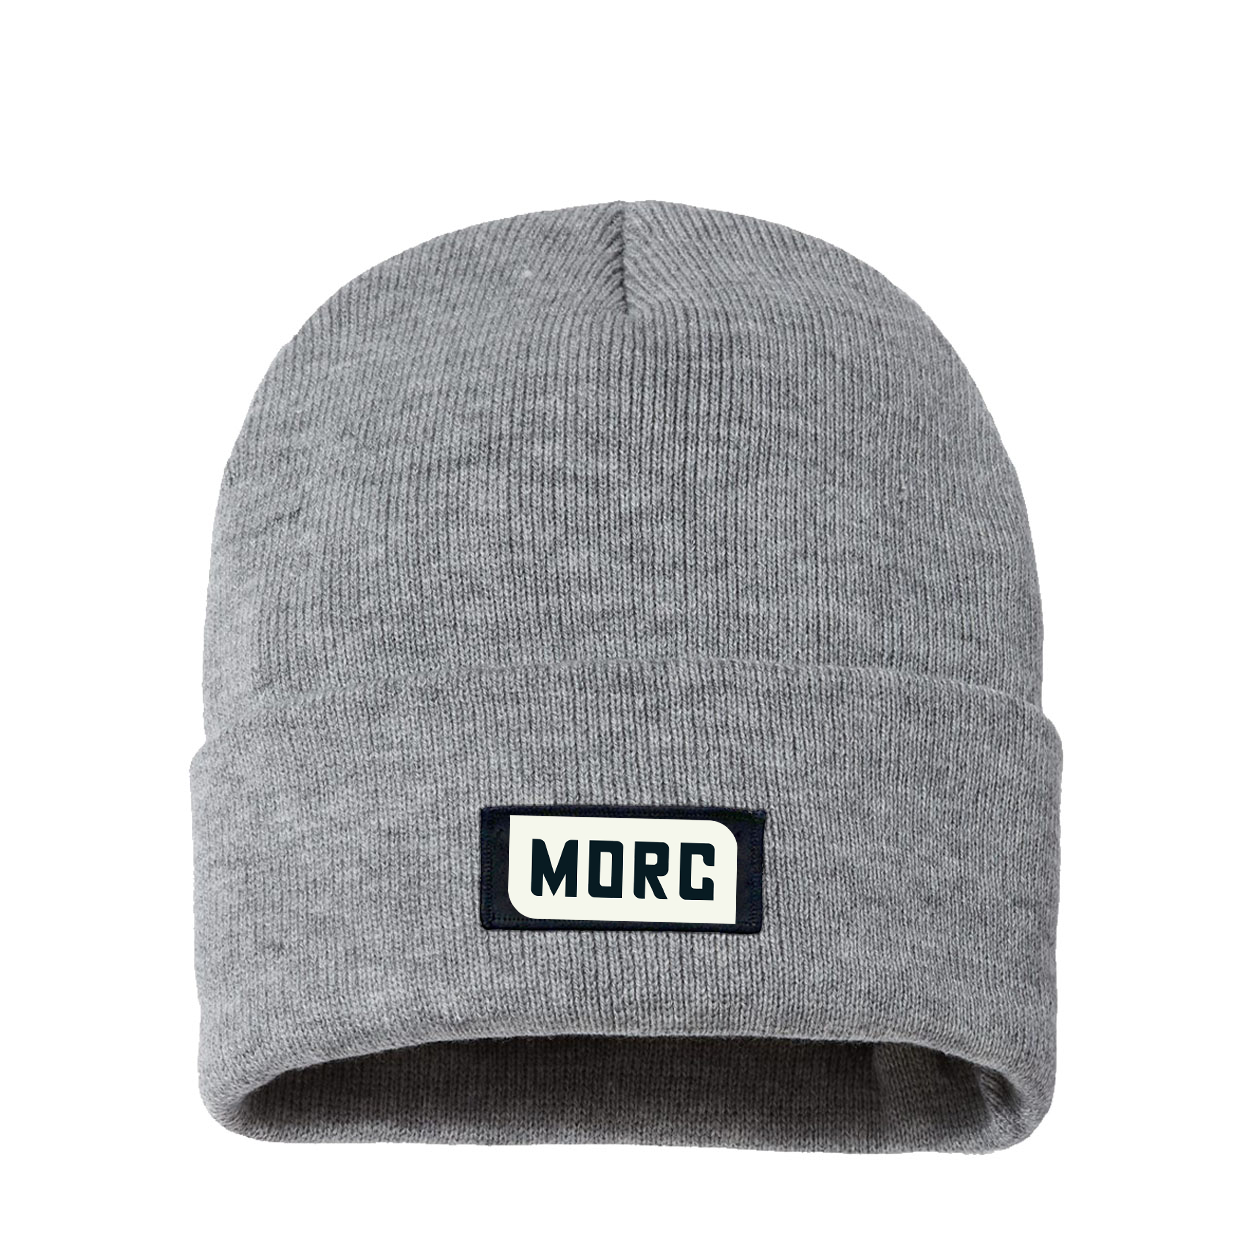 MORC Night Out Woven Patch Sherpa Lined Cuffed Beanie Heather Gray